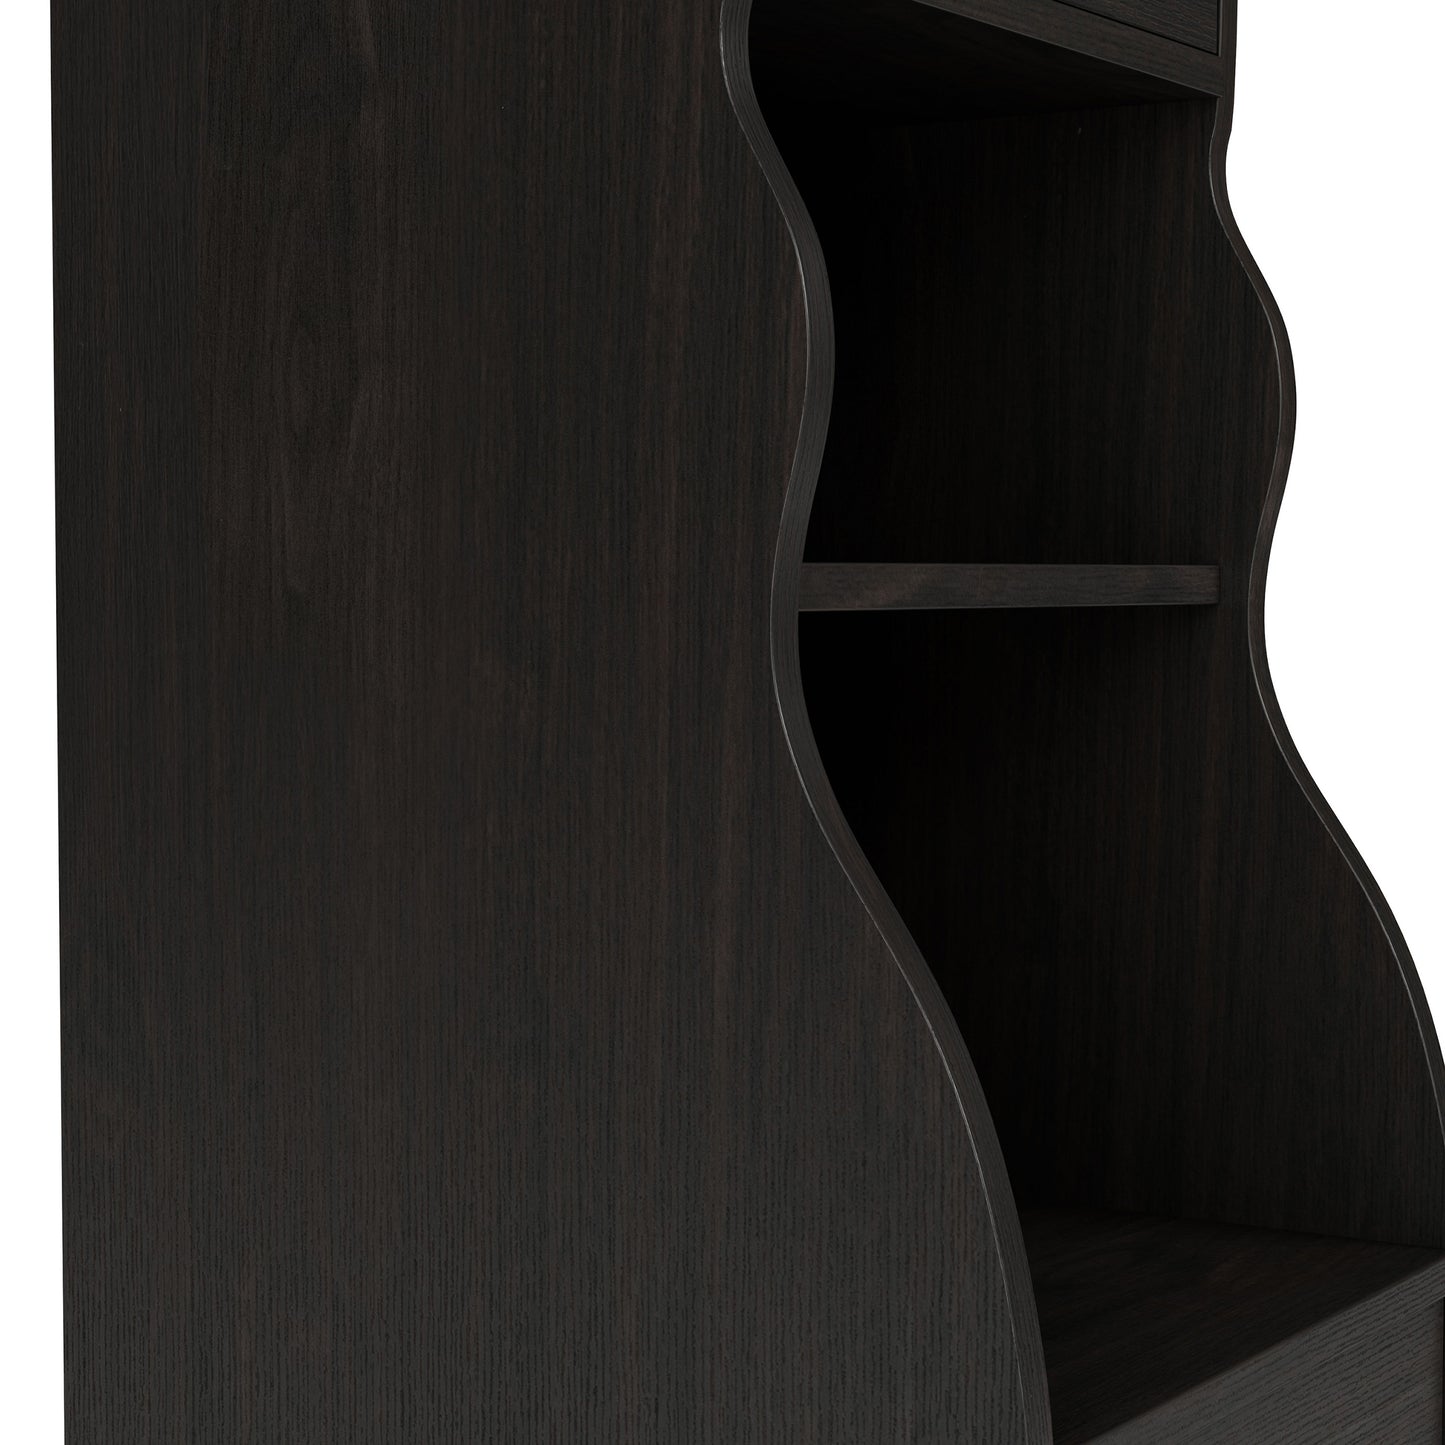 Right angled close-up wavy panel silhouette view of a transitional espresso two-door tower cabinet on a white background